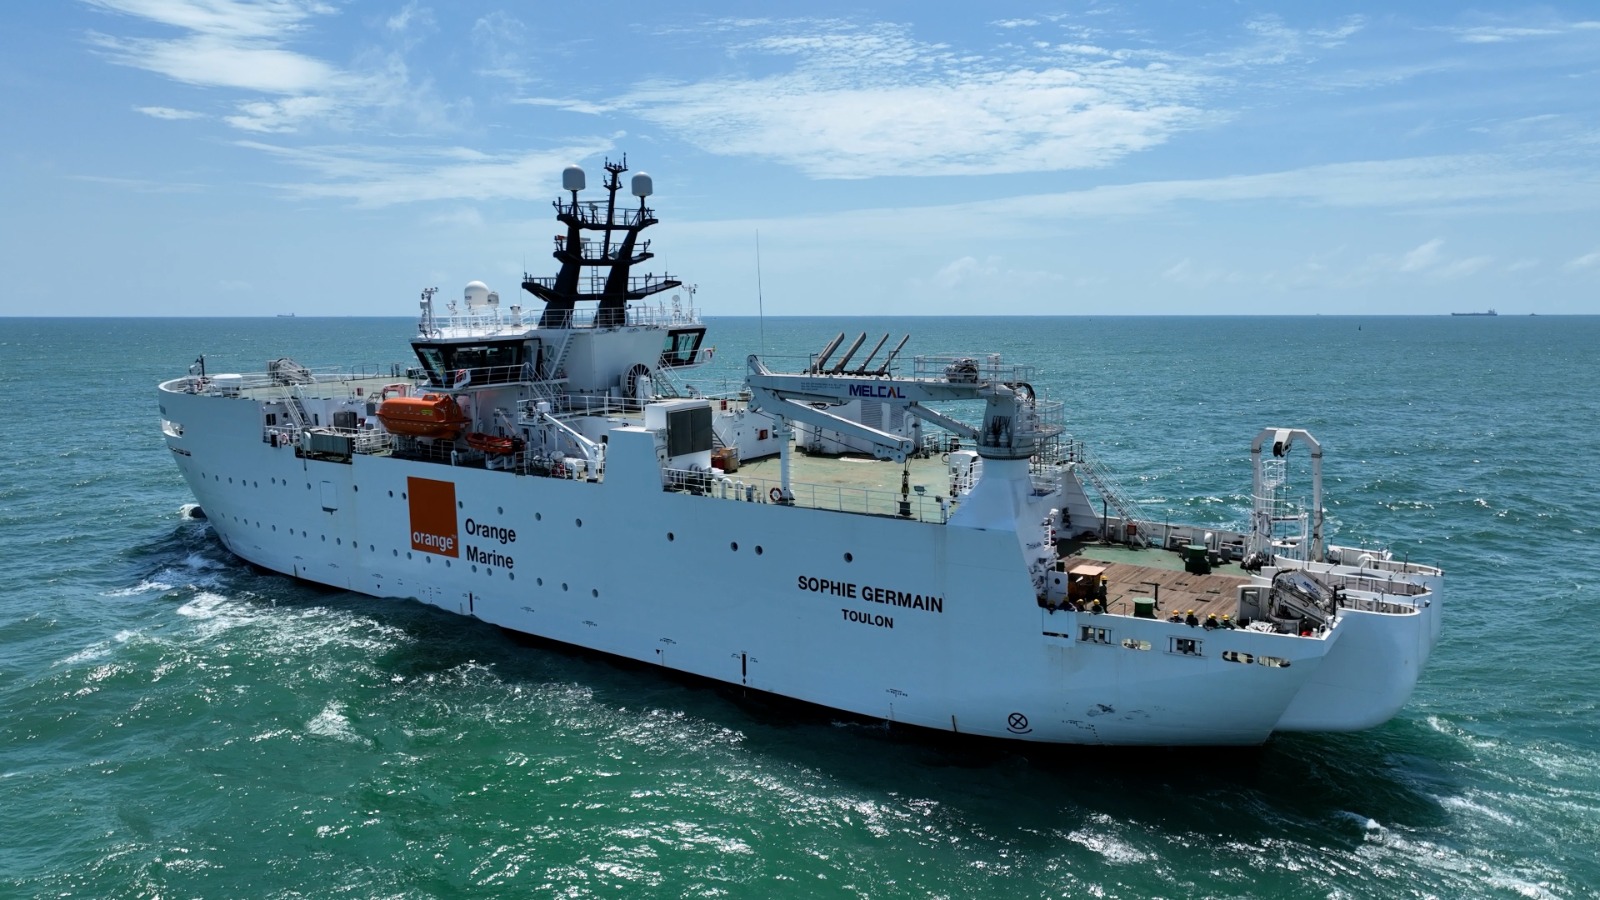 Cable Laying and Repair Vessel